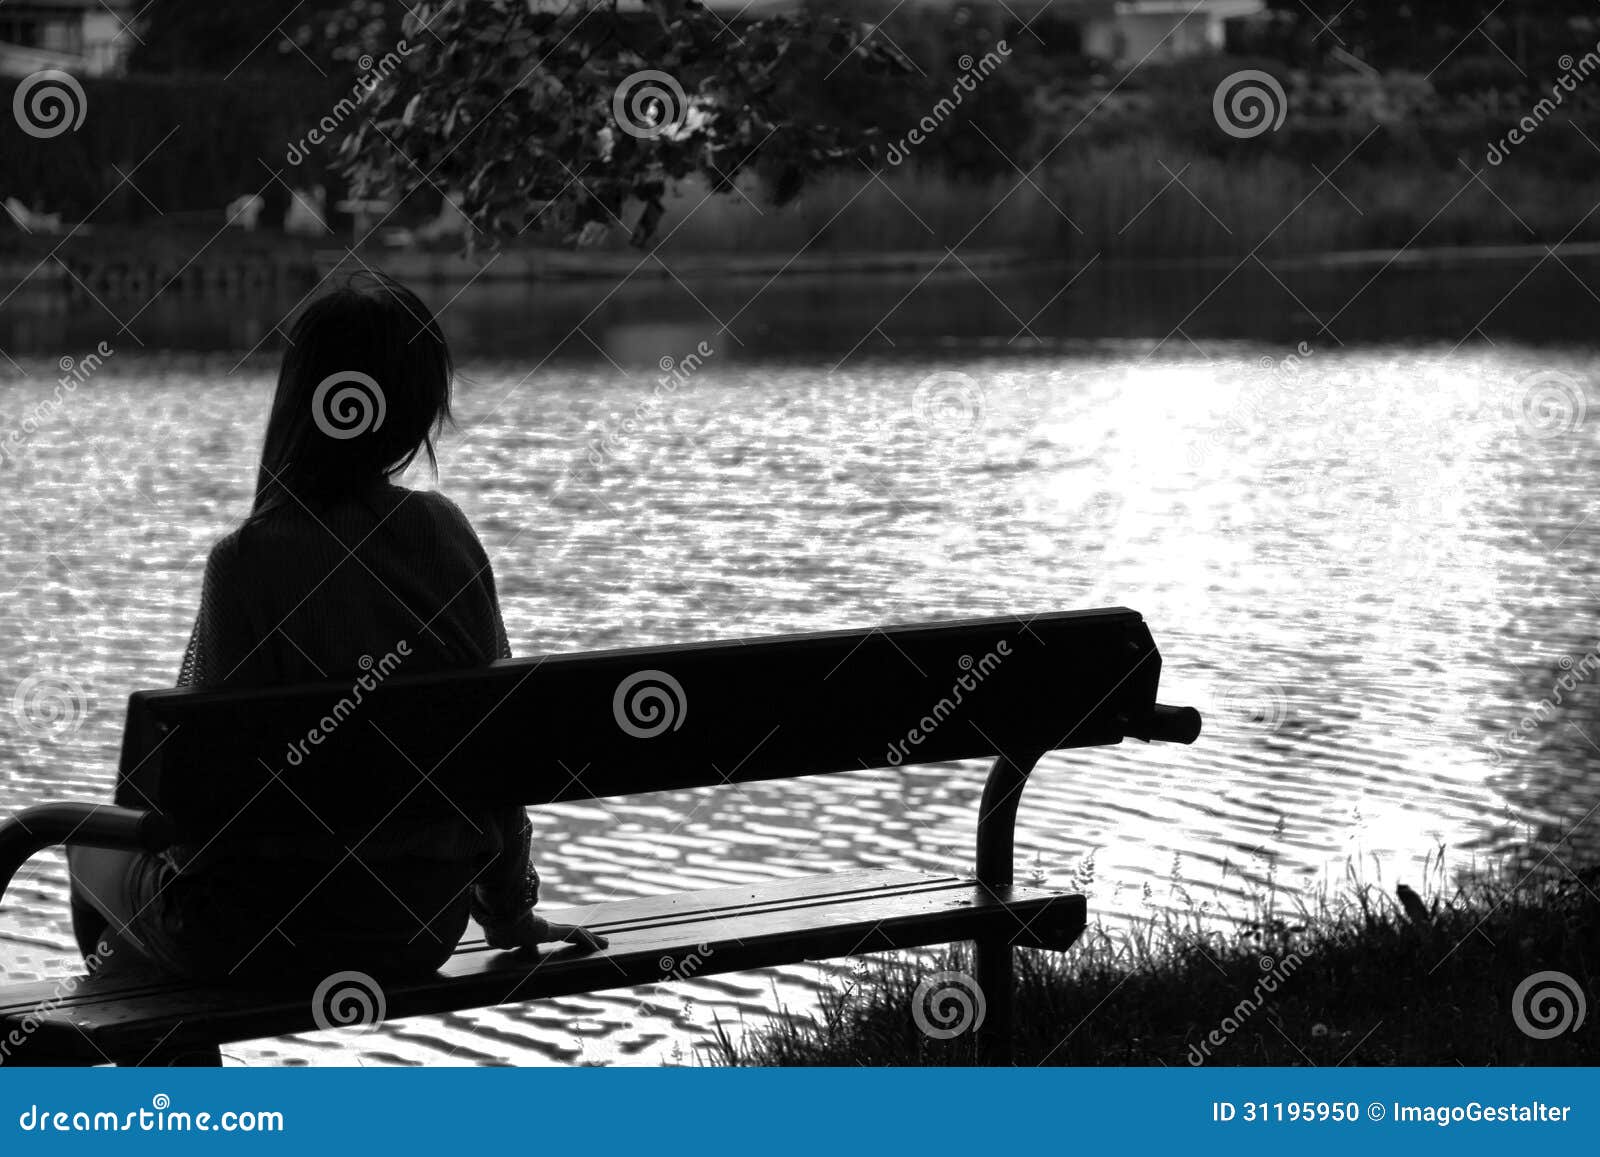 lonely girl by the lake